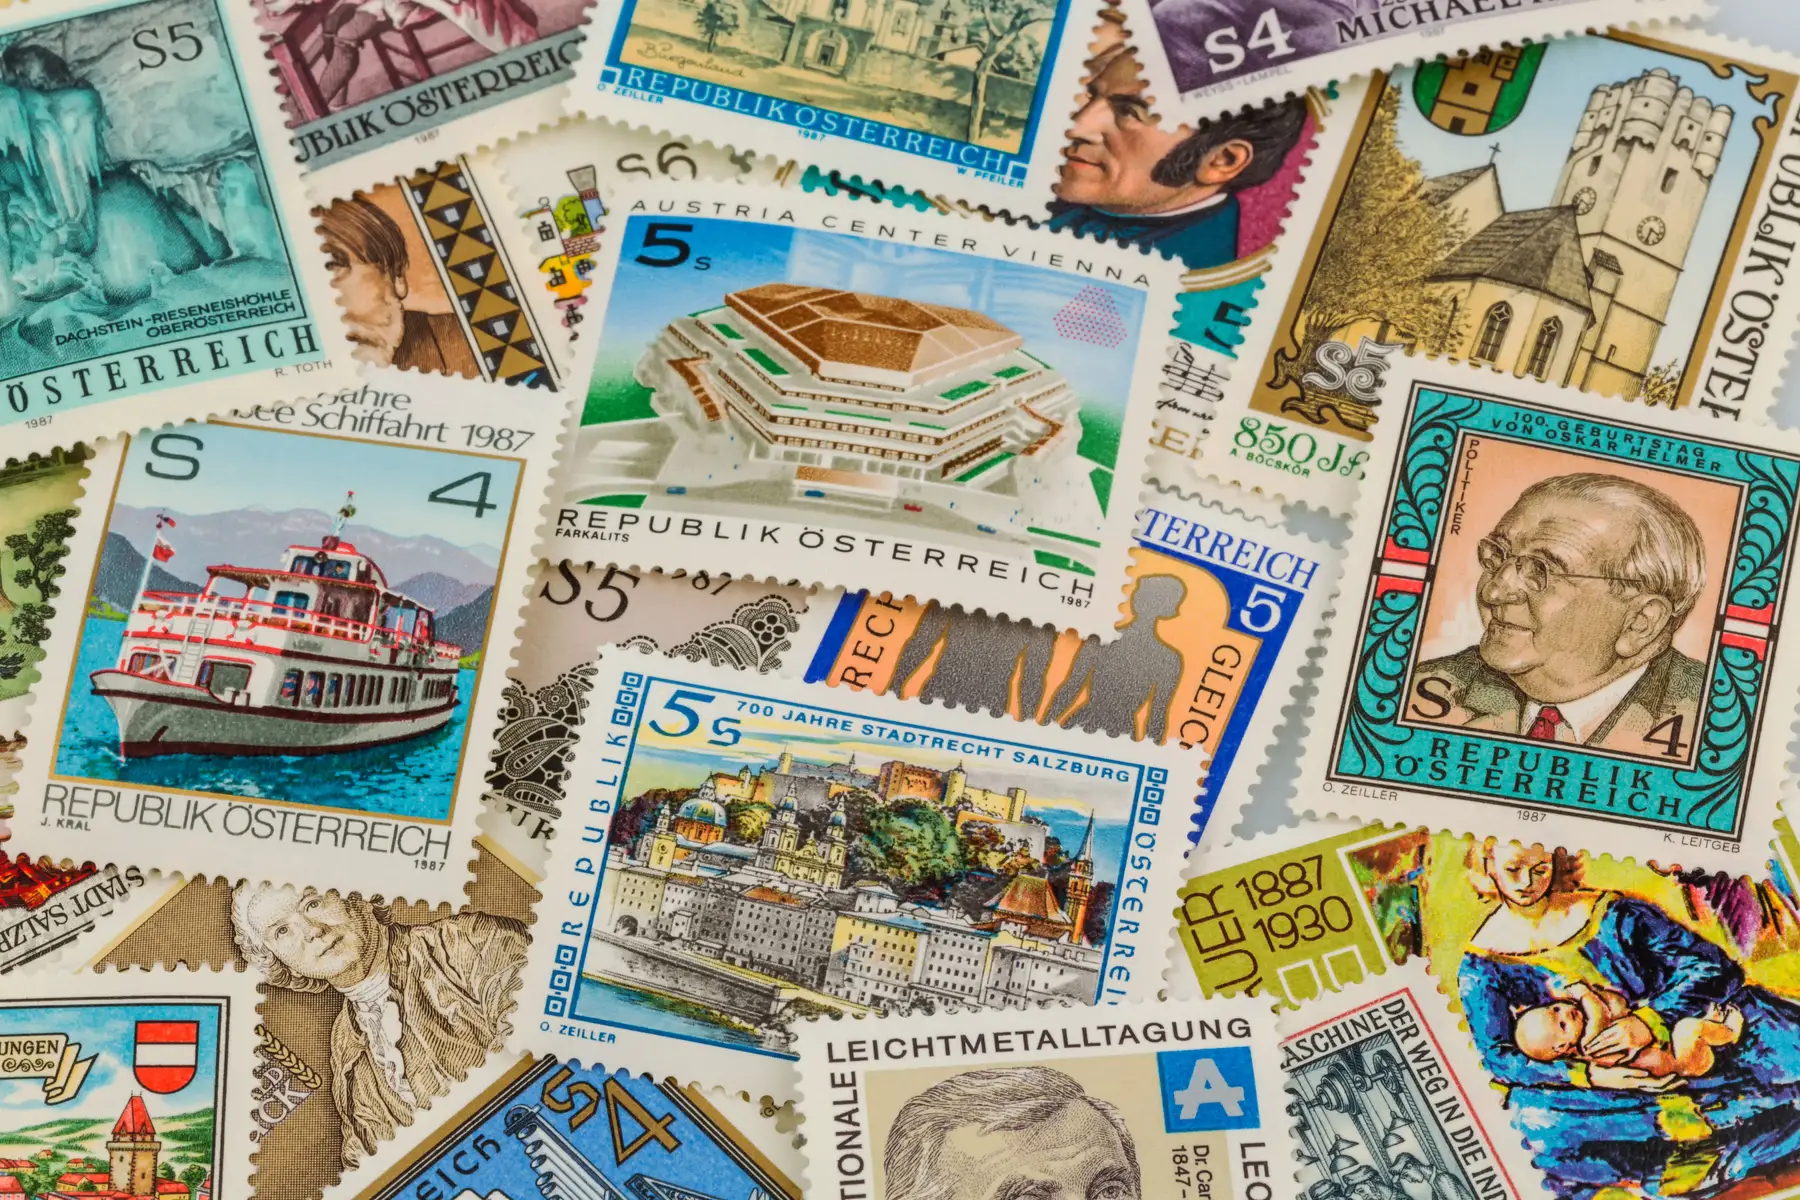 Austrian postage stamps